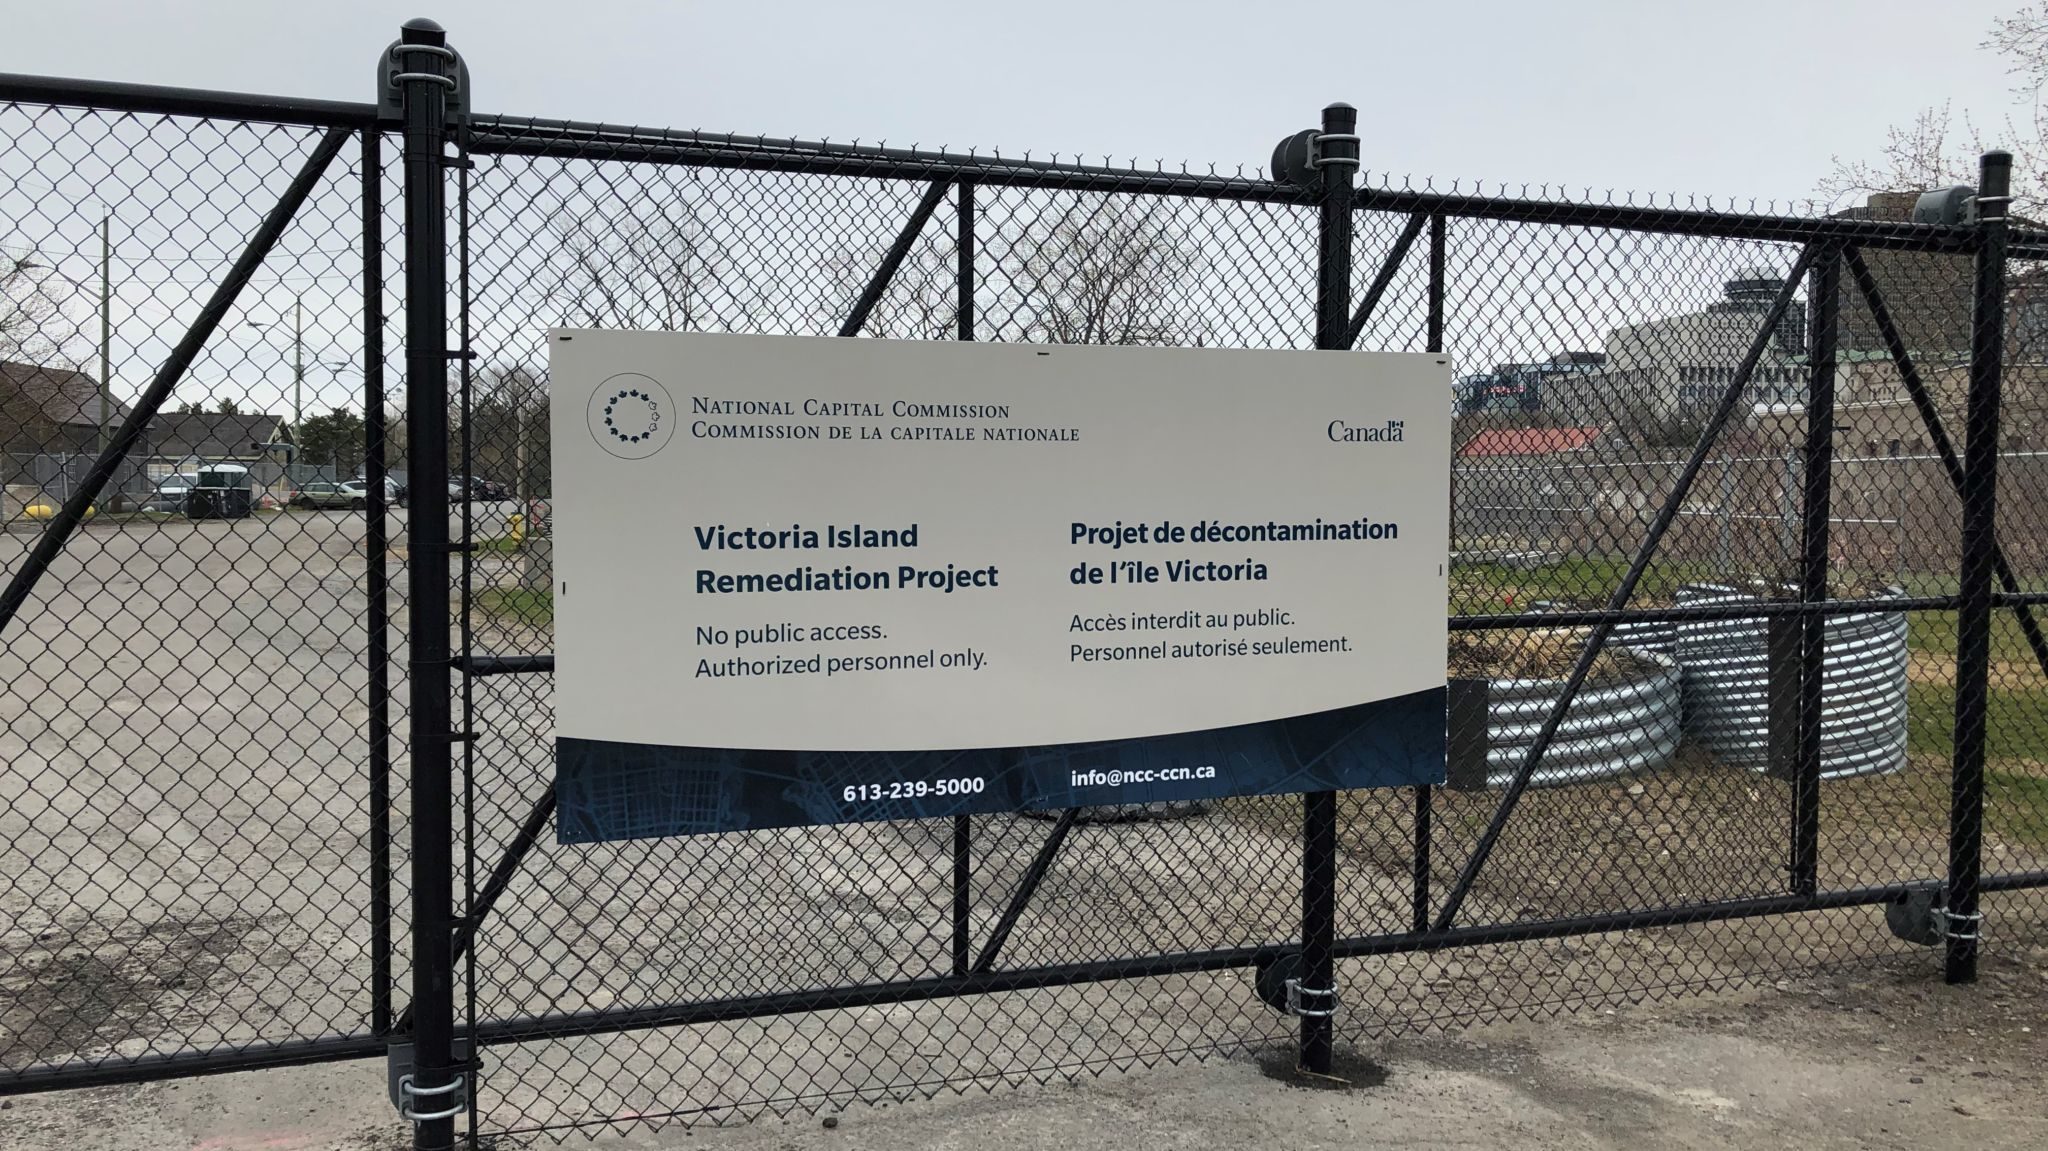 NCC signage on a fence, reading: “Victoria Island Remediation Project. No public access. Authorized personnel only.”